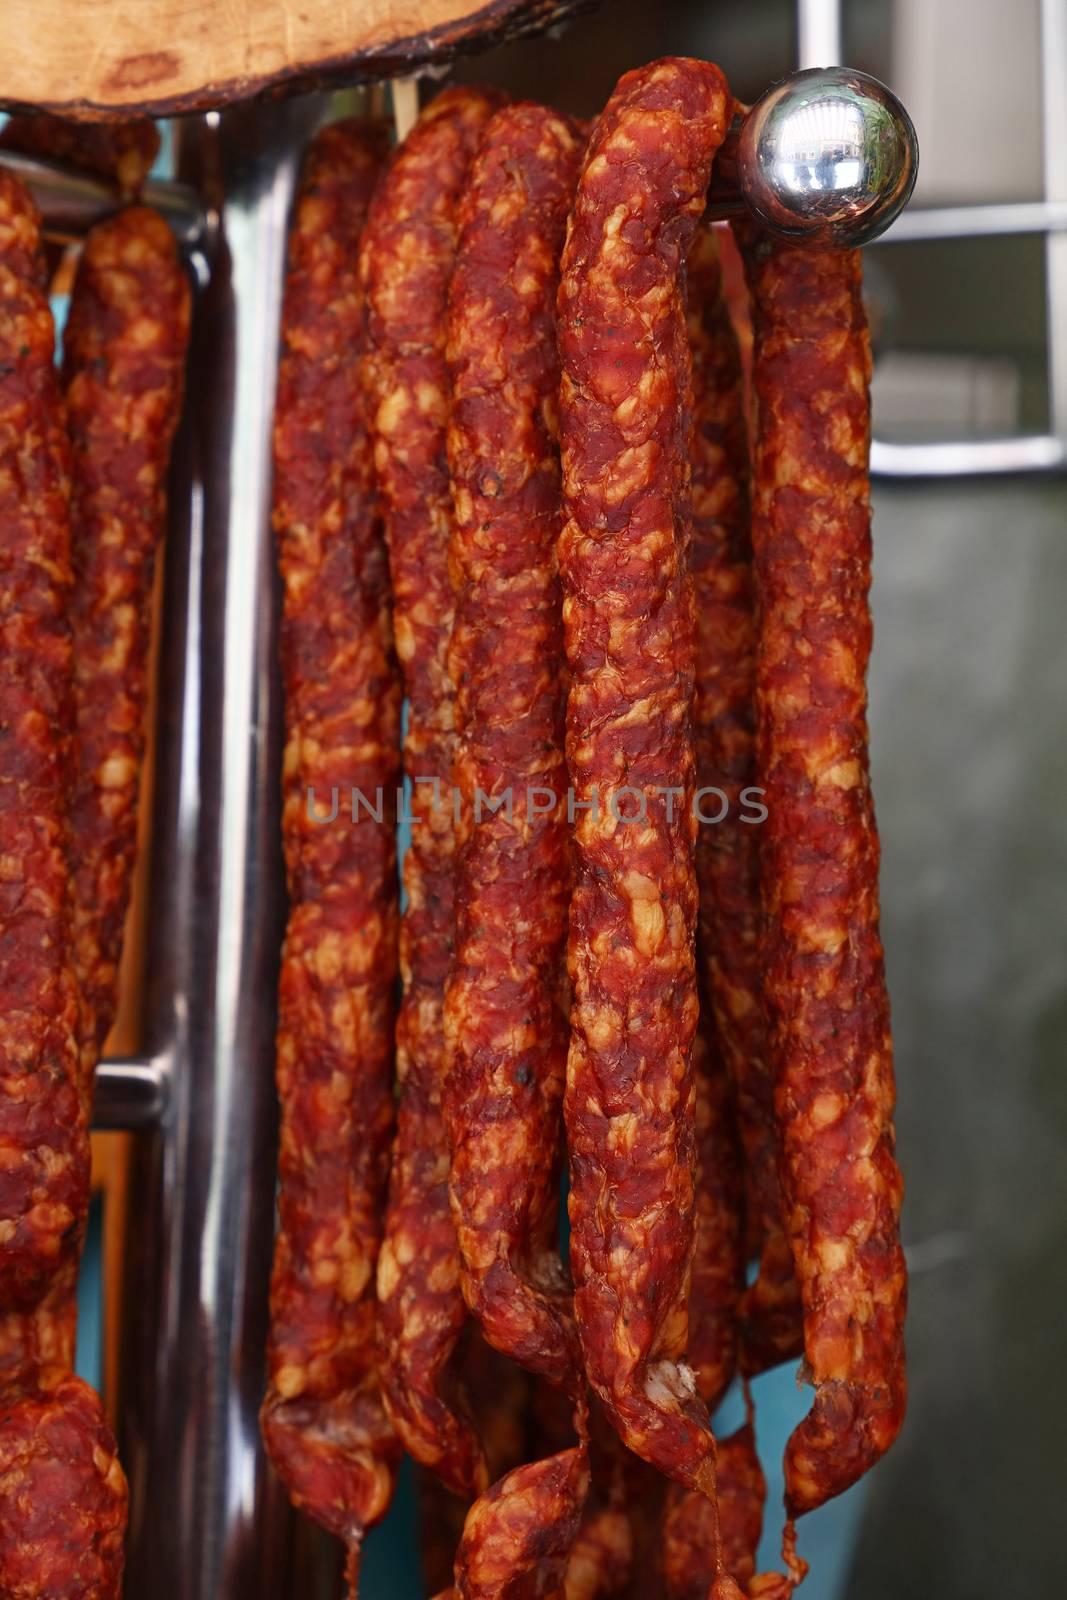 Cured smoked red meat sausages hanging in store by BreakingTheWalls